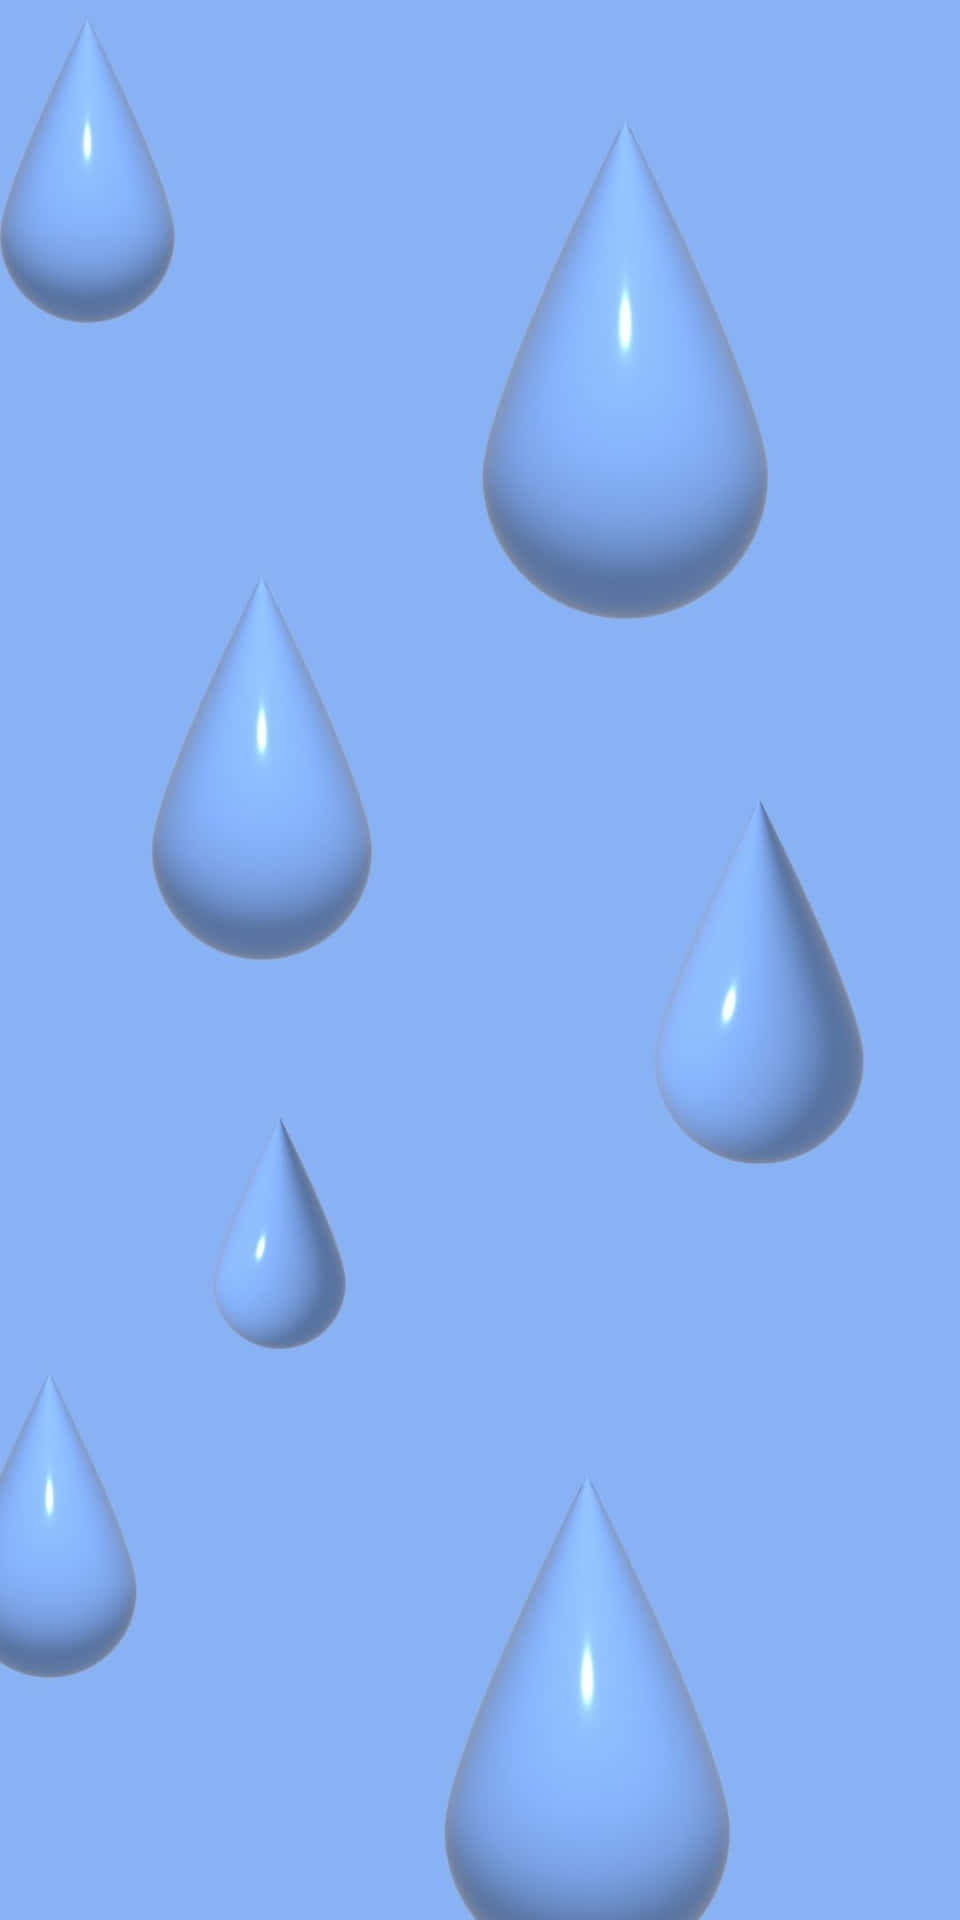 Water Drops On A Blue Background Background